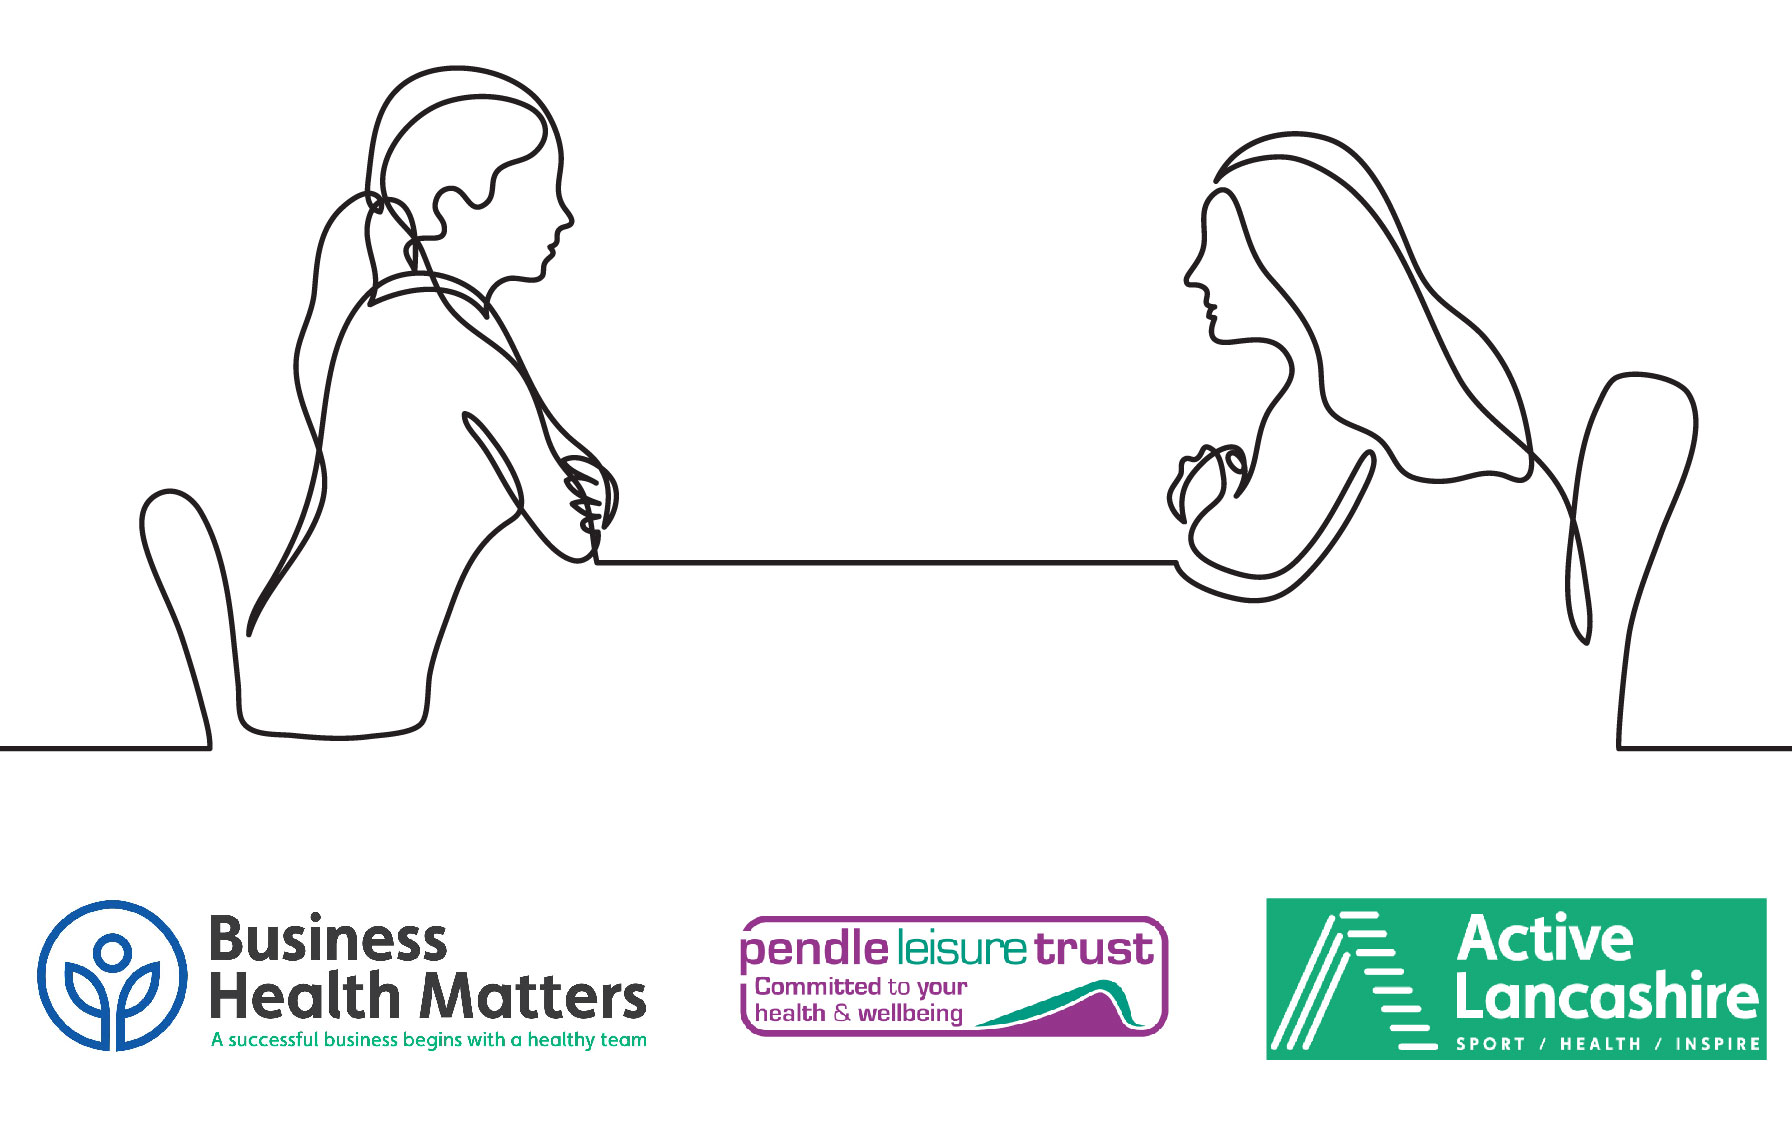 We're Supporting Active Lancashire's Business Health Matters Programme